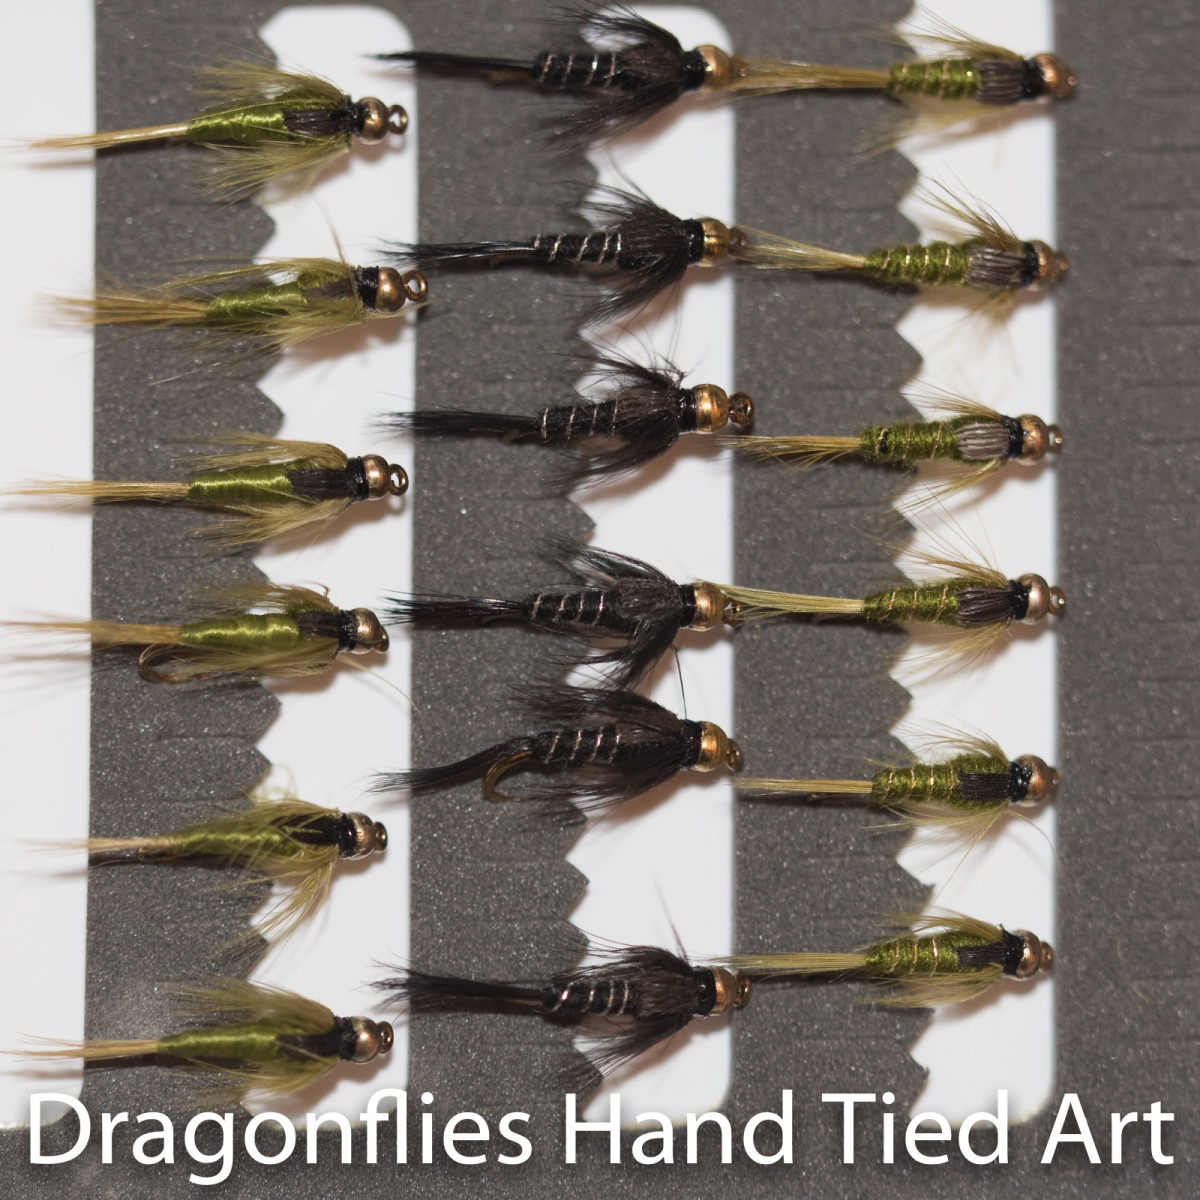 18 Barbless Gold Head Nymphs Trout Fly fishing Flies Rough Olive, Pond  Olive & Black Nymph - Dragonflies